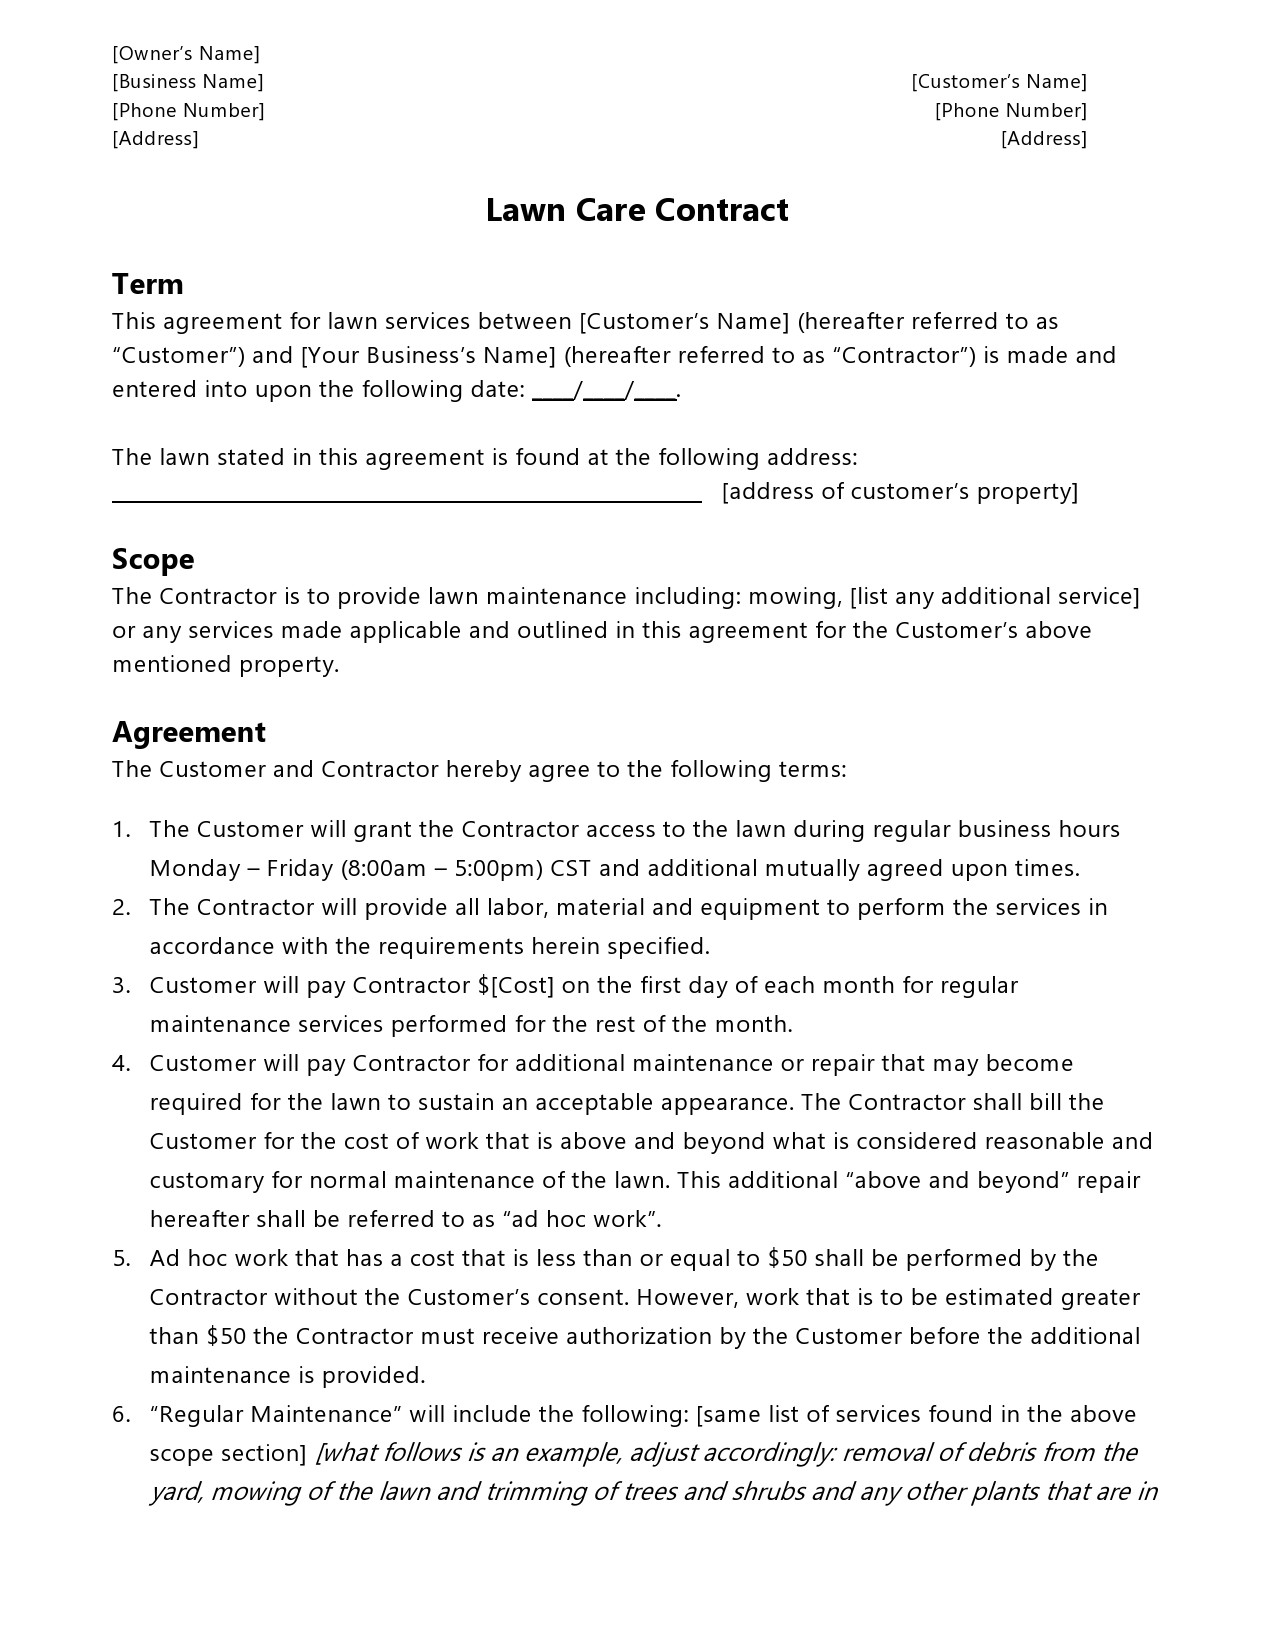 Free lawn care contract template 06